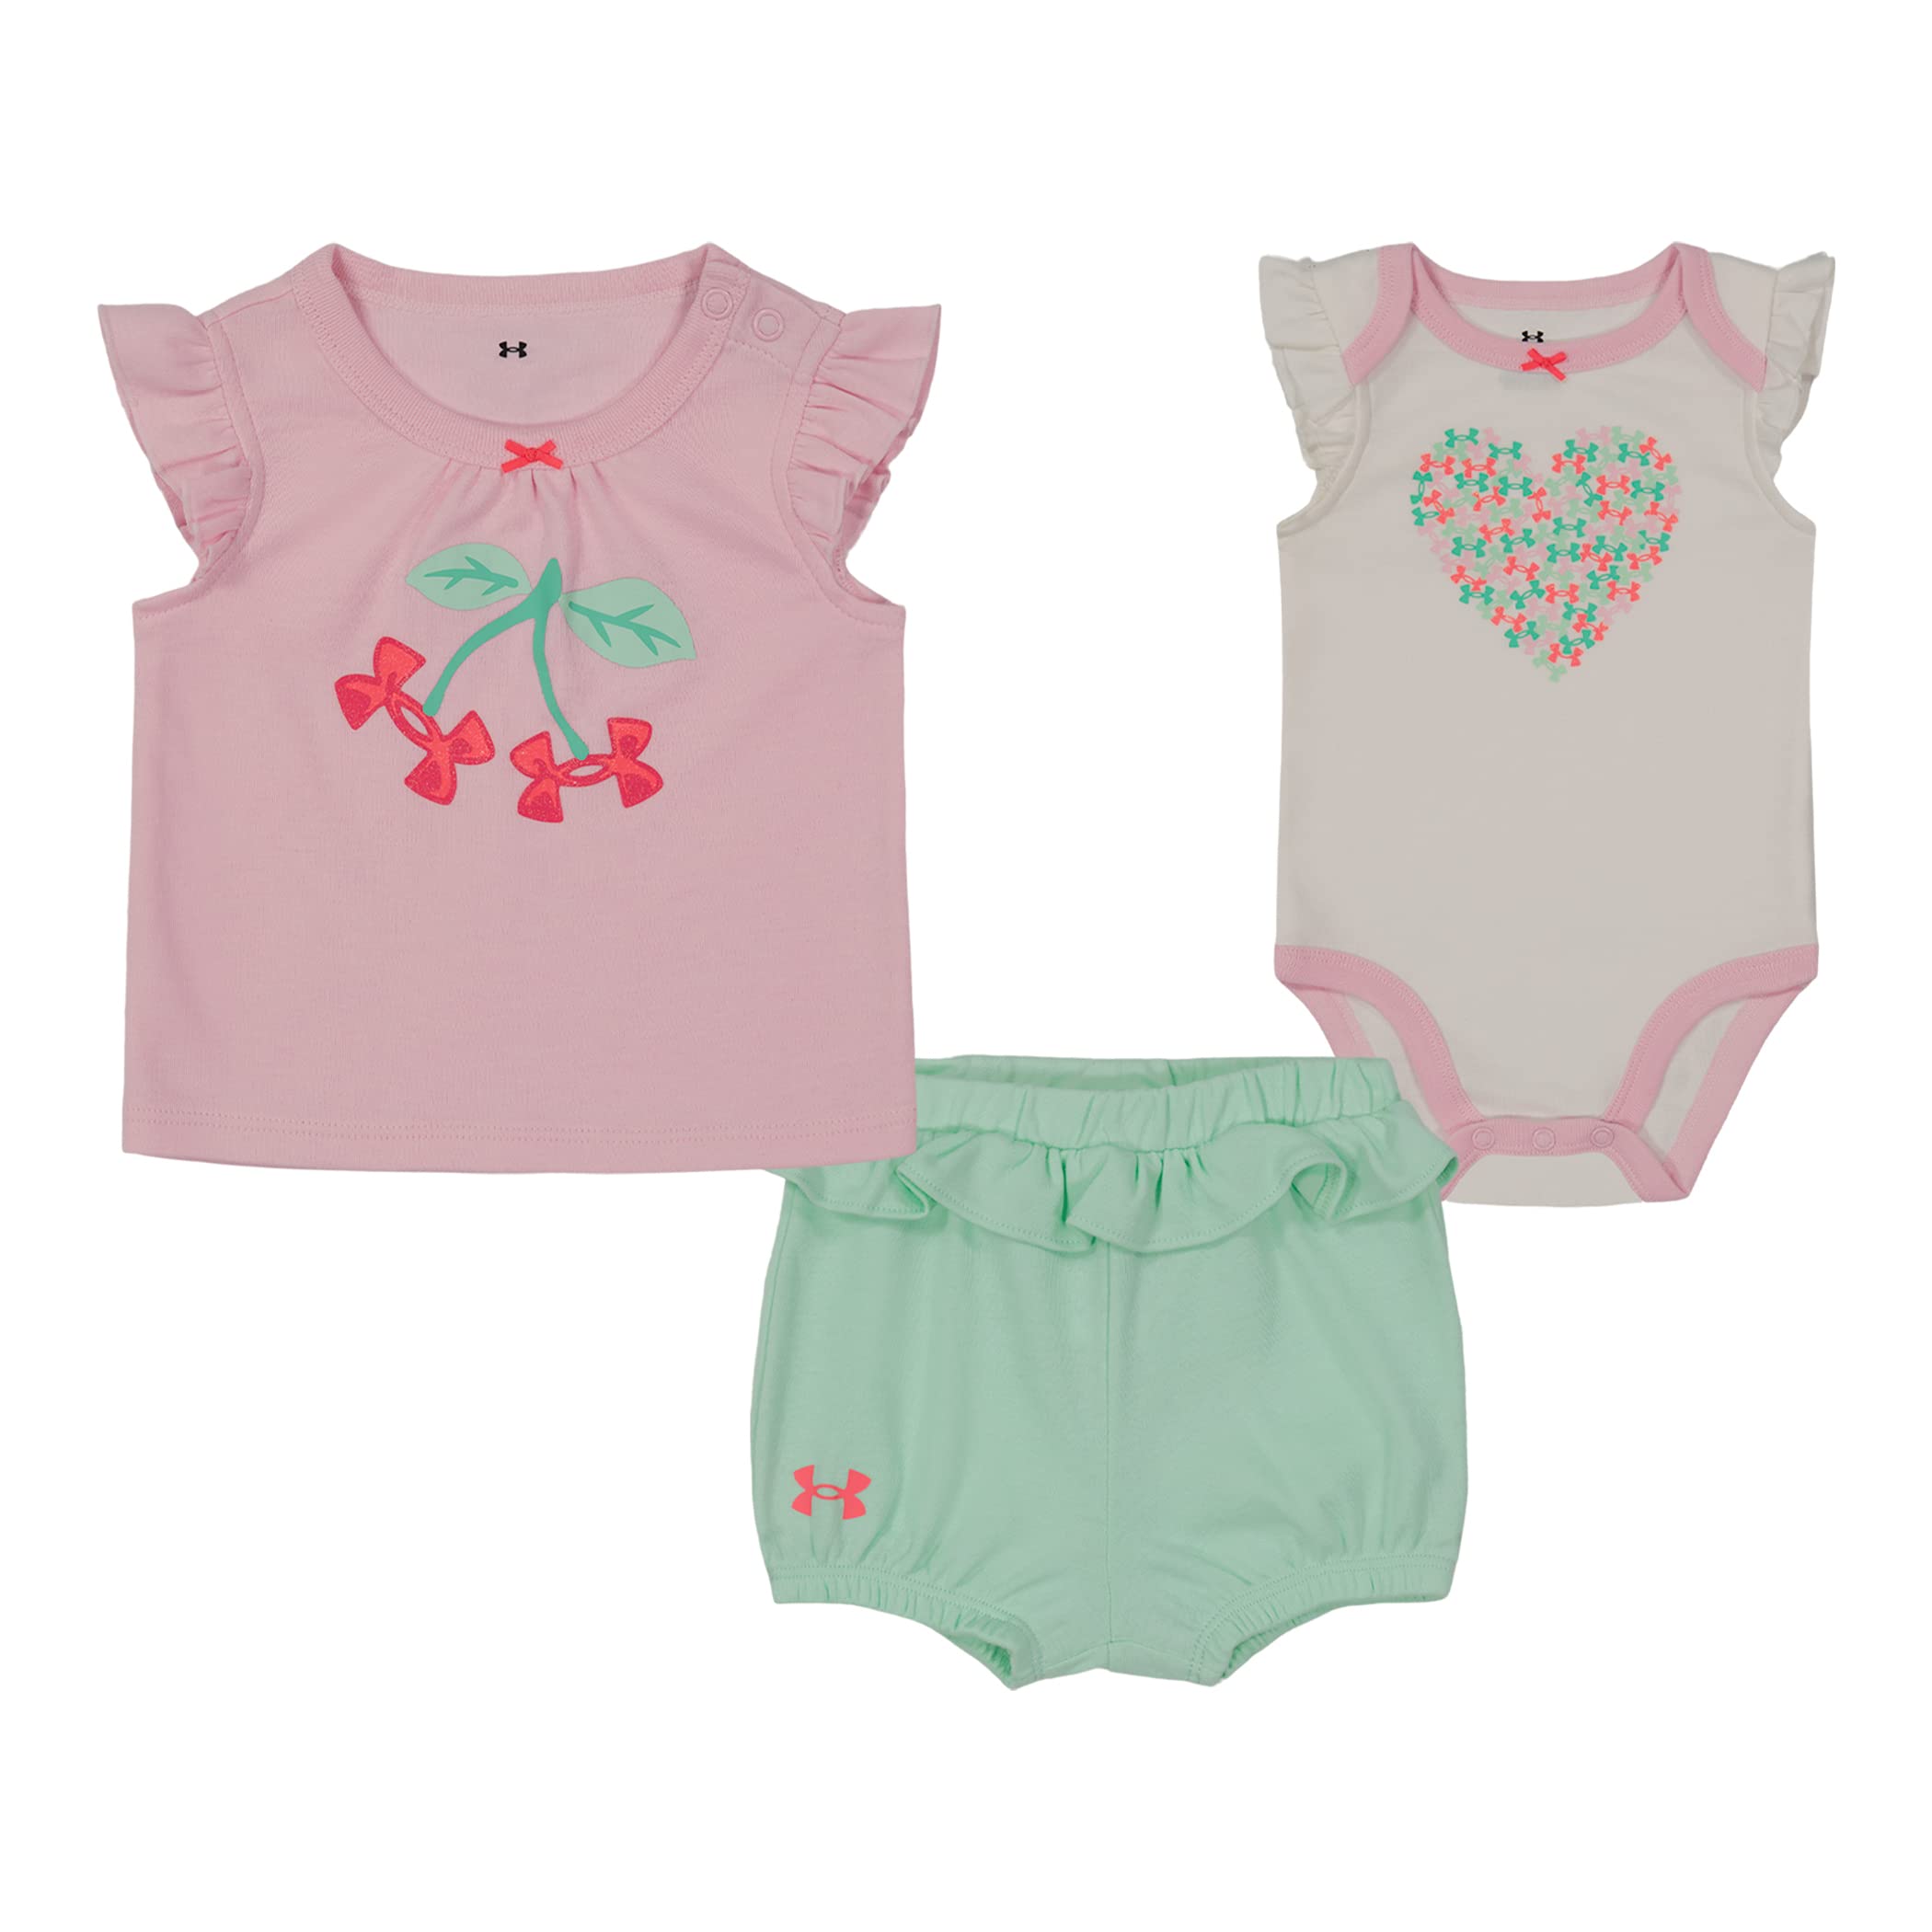 Under Armour baby-girls 3-piece Set, Bodysuit With Coordinated Top & Bottom, Lightweight & Relaxed Fit3 Piece Set